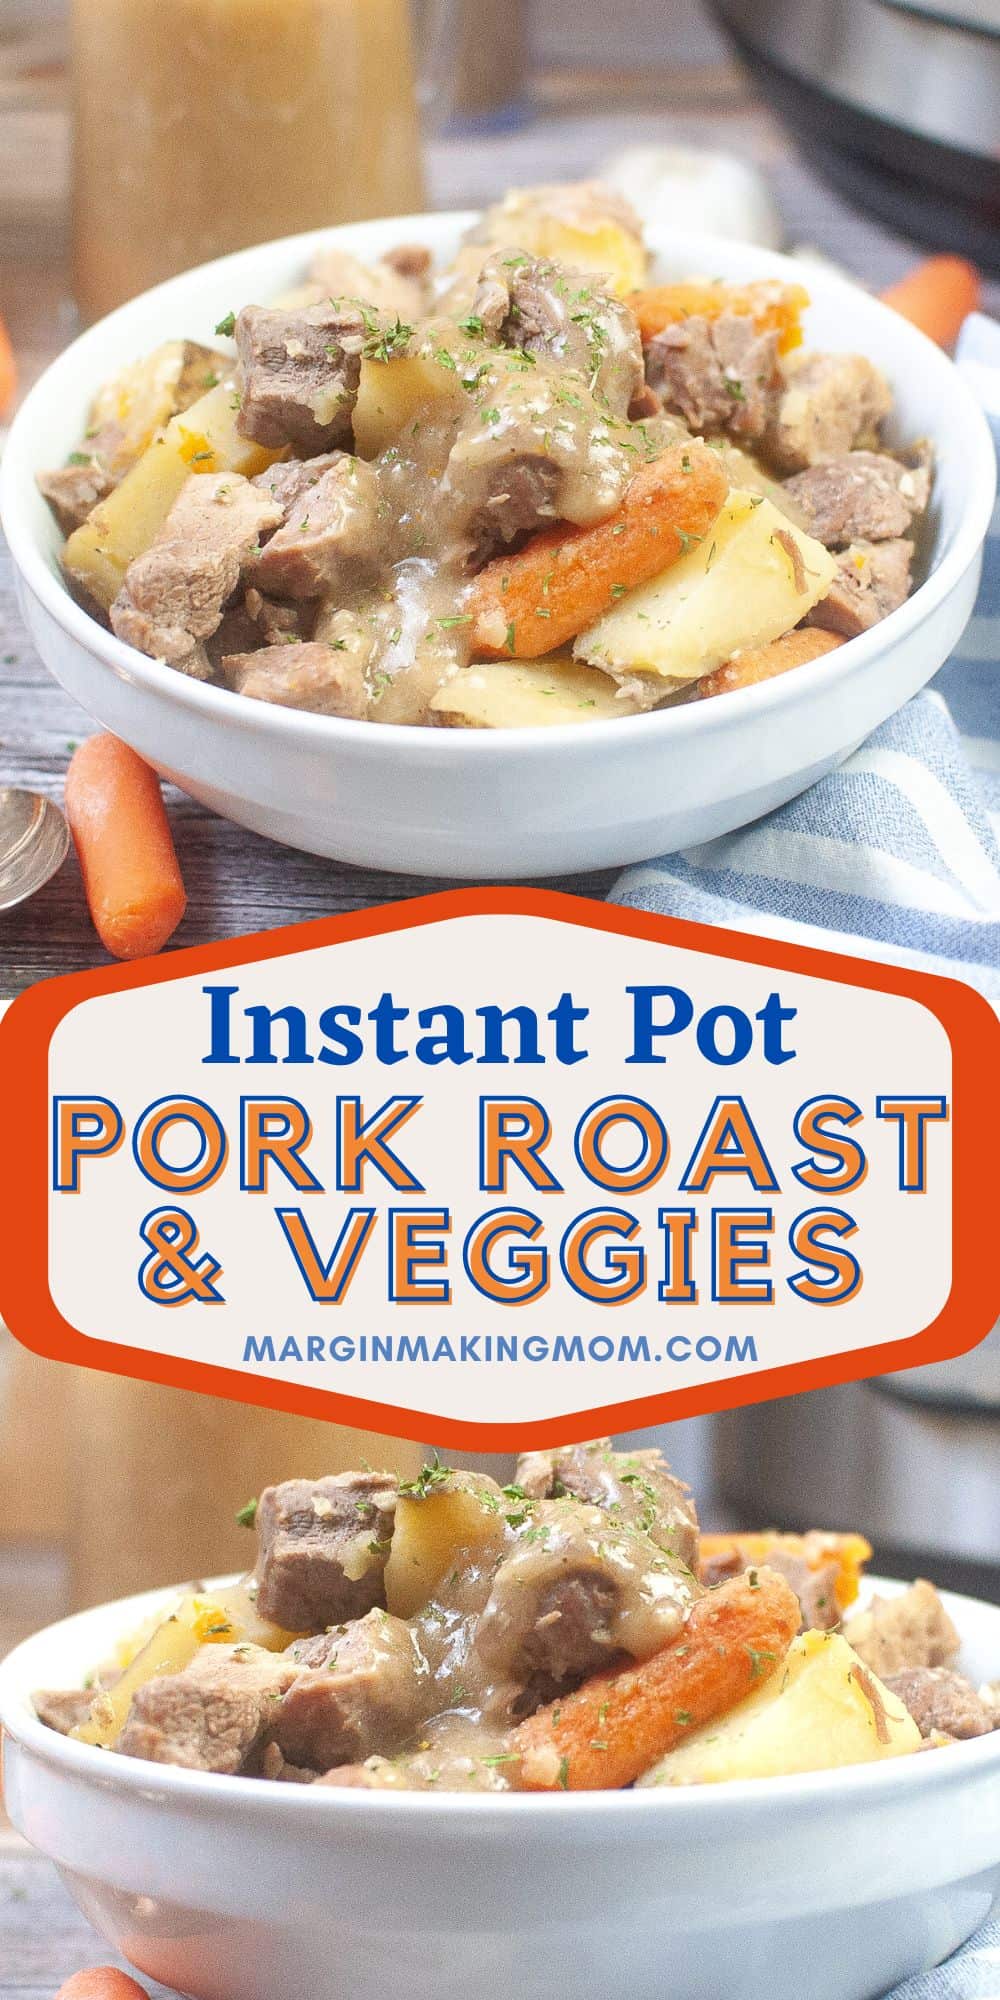 two photos; one shows a side view of Instant Pot pork roast in a white bowl, while the other shows an overhead angle and detailed view of the food